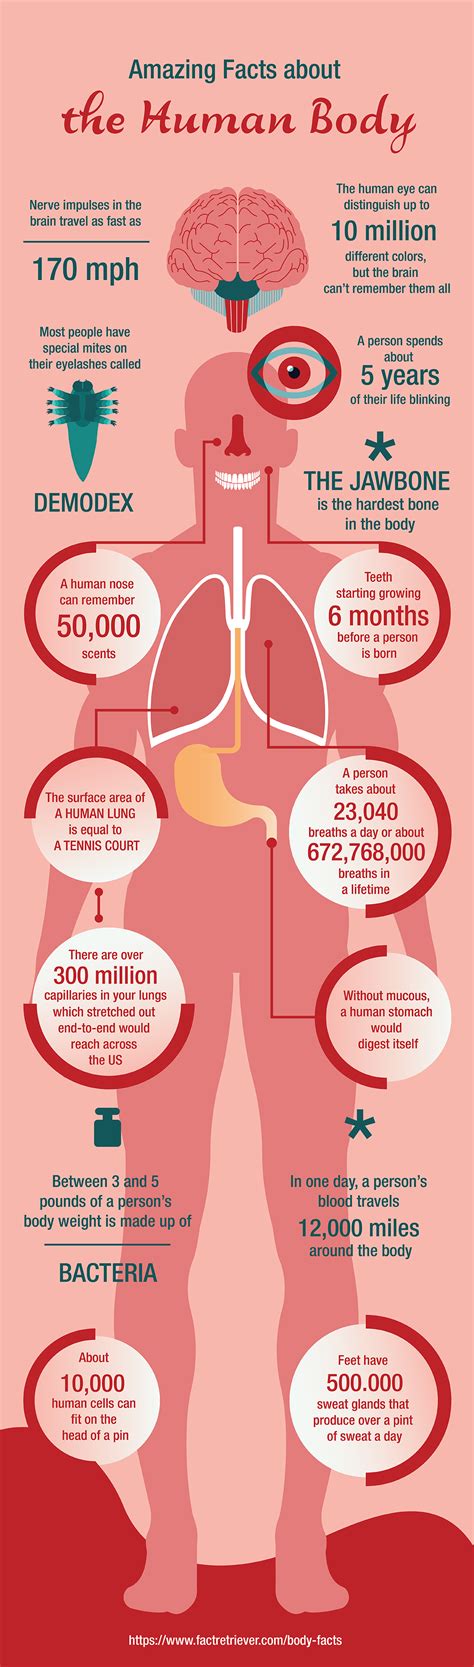 Interesting Facts About The Human Body Infographic Including Anatomy